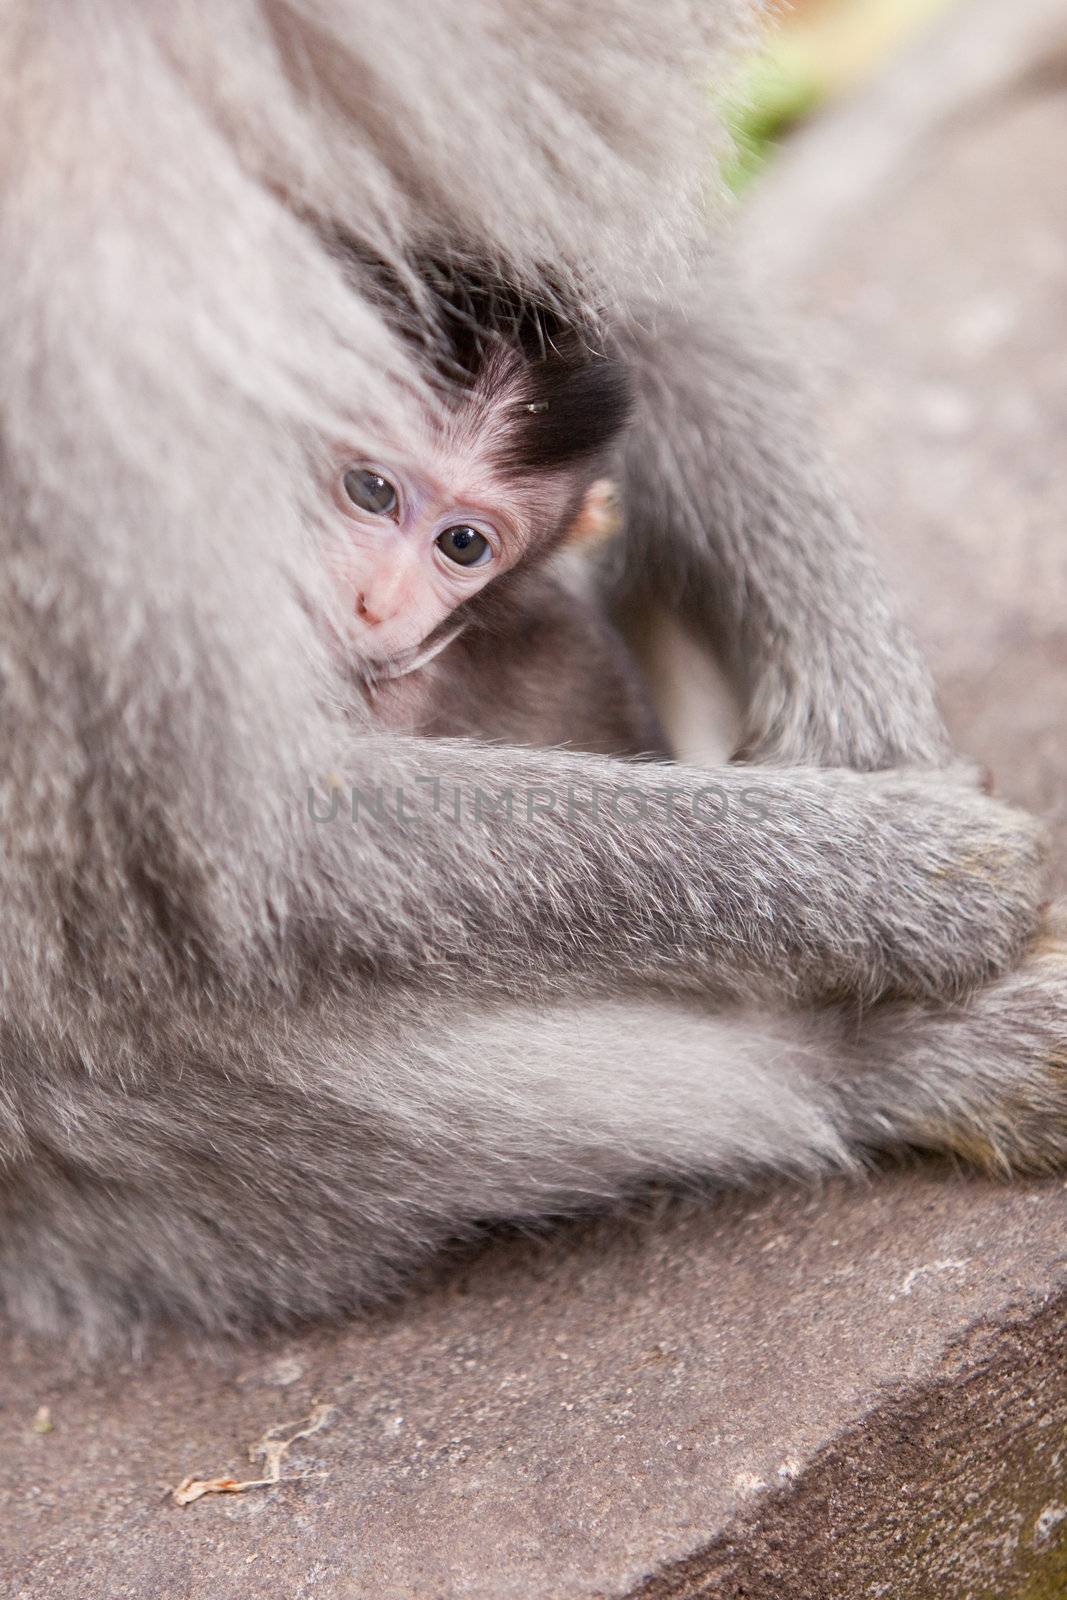 Cute little macaque monkey hiding in mom's arms